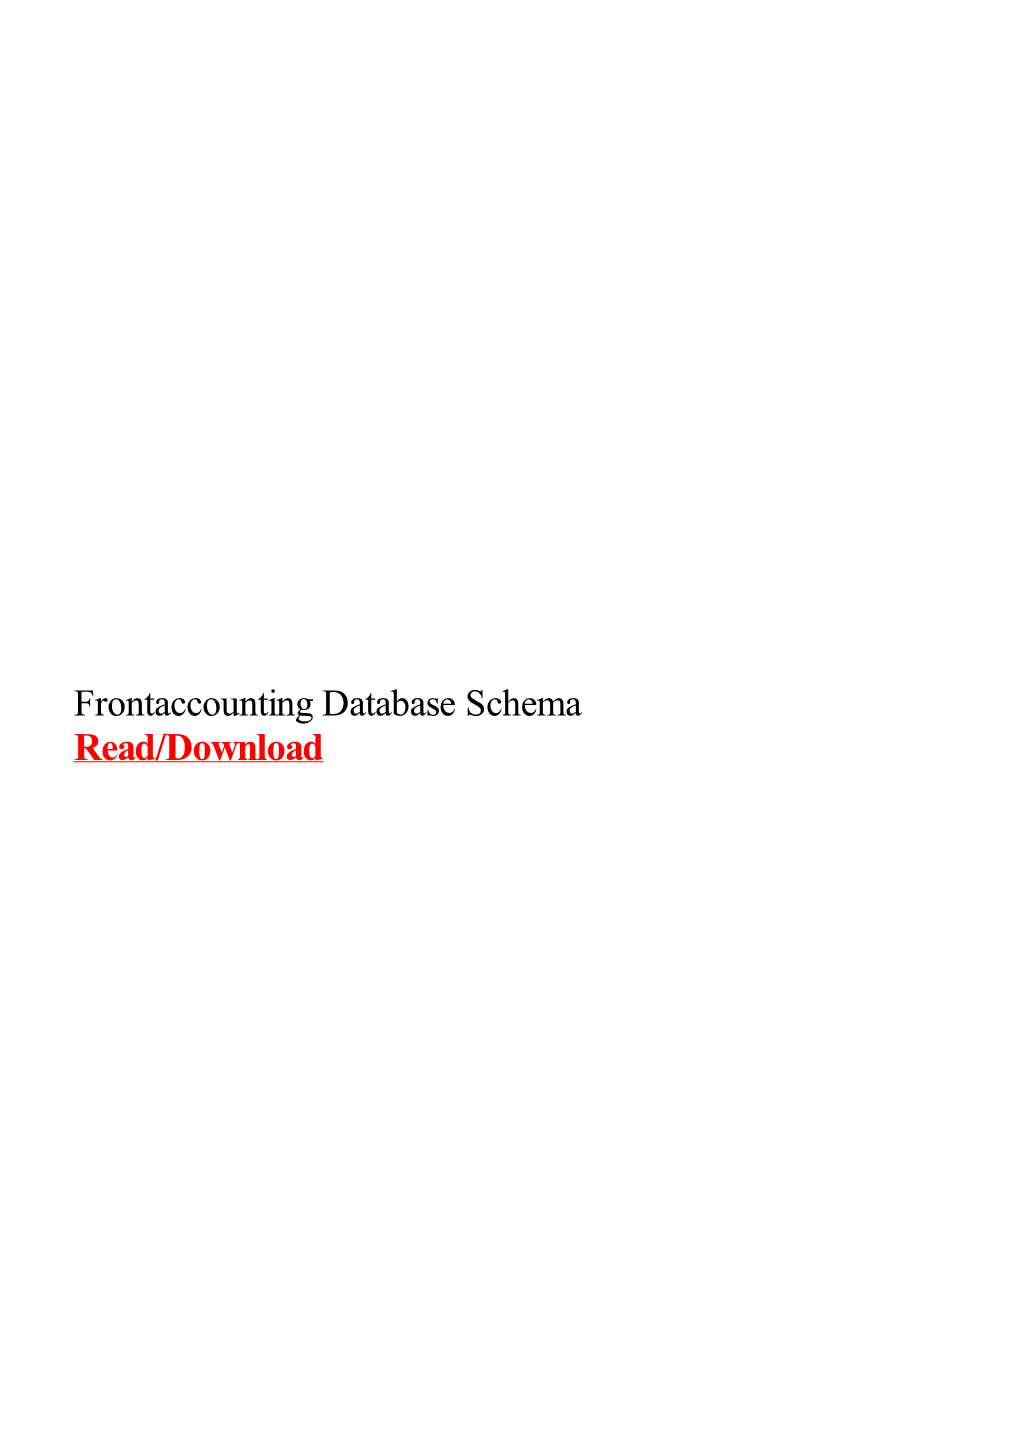 Frontaccounting Database Schema